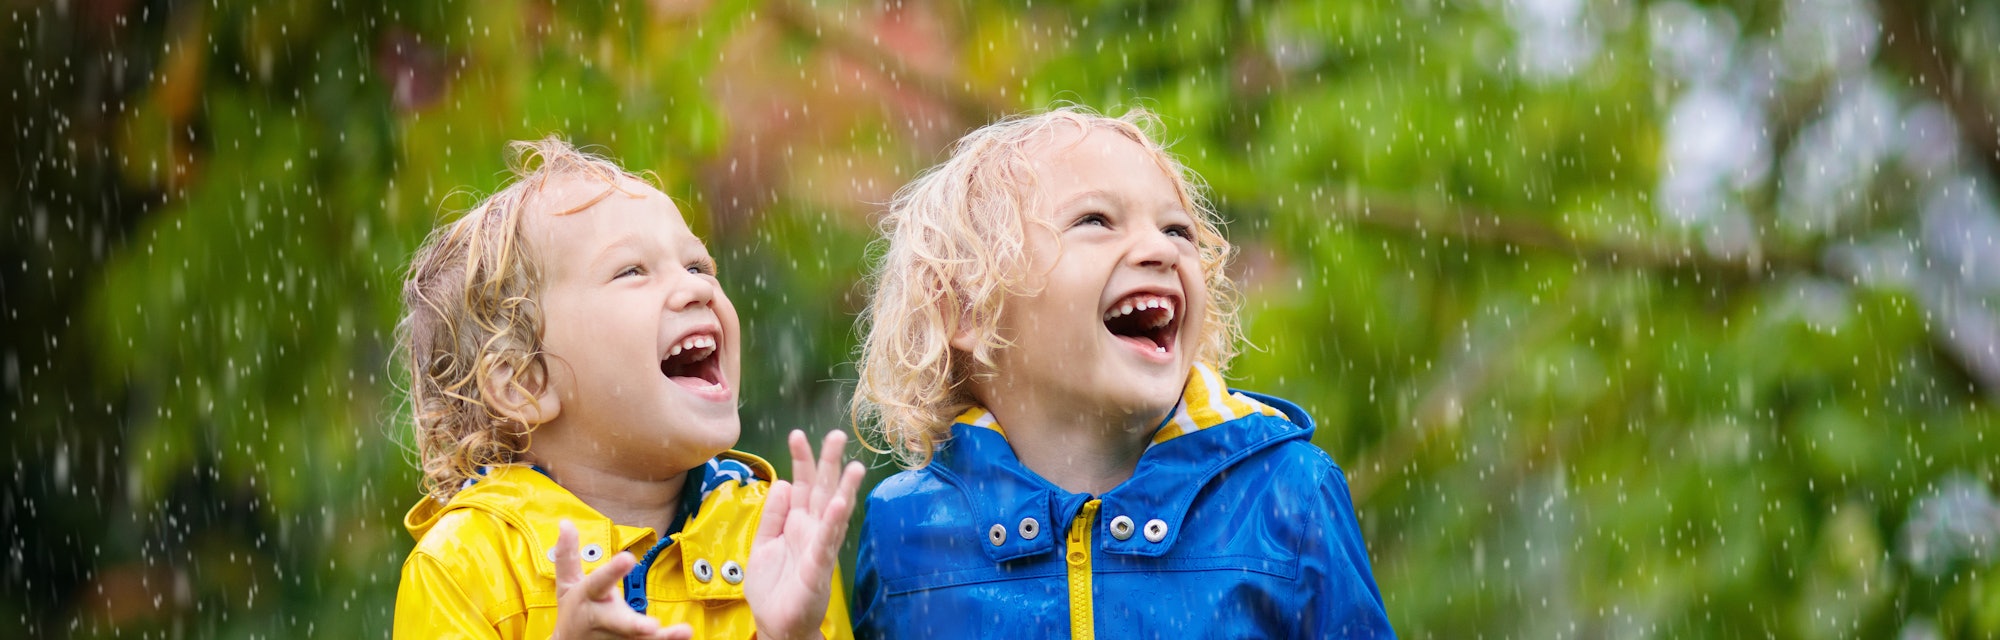 Let your kids play in the rain.